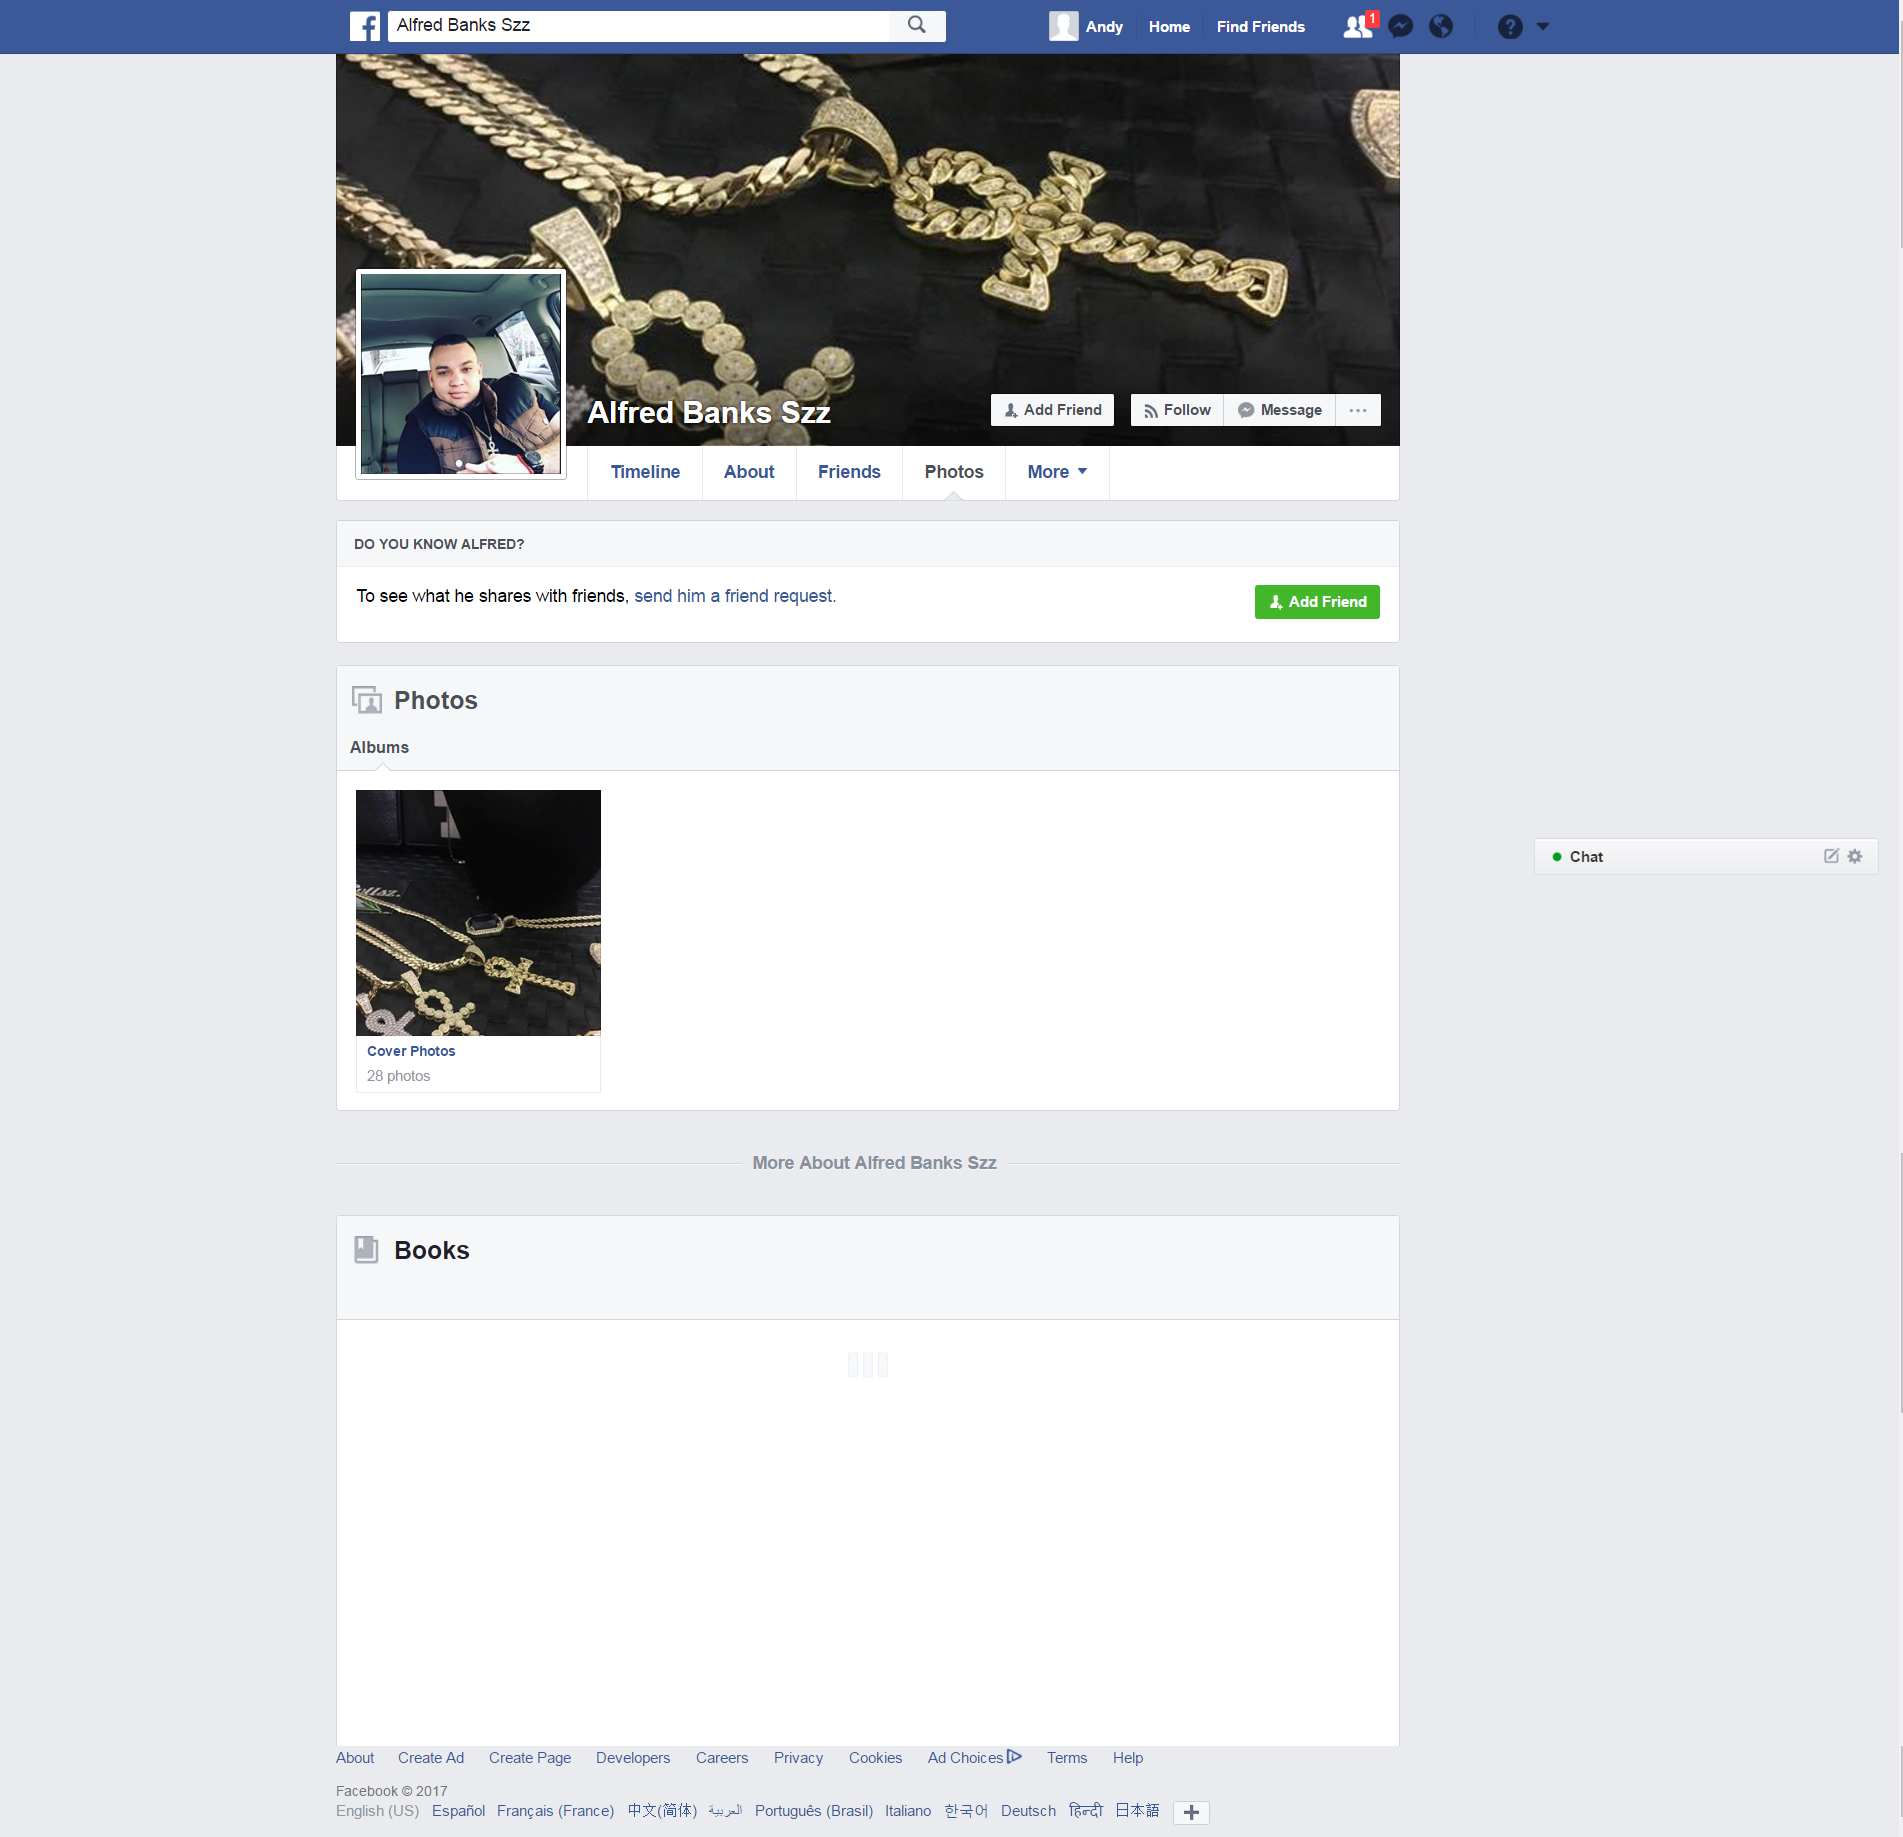 | This is his Facebook page which he uses his alias name Alfred Banks Szz. | 